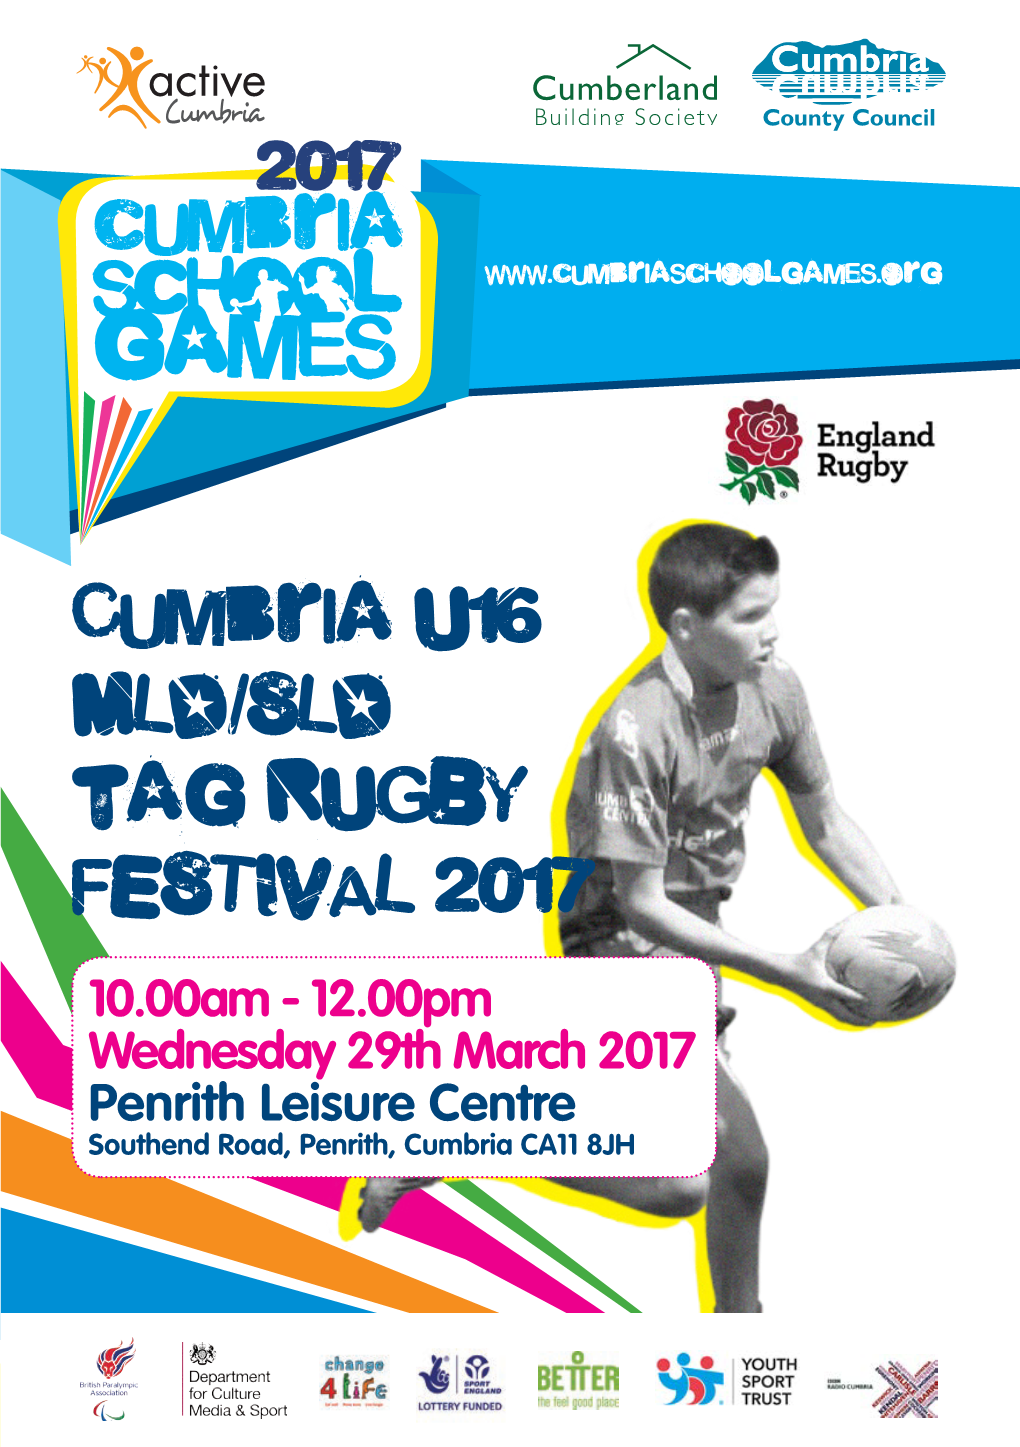 Cumbria U16 MLD/SLD Tag RUGBY FESTIVAL 2017 10.00Am - 12.00Pm Wednesday 29Th March 2017 Penrith Leisure Centre Southend Road, Penrith, Cumbria CA11 8JH Welcome